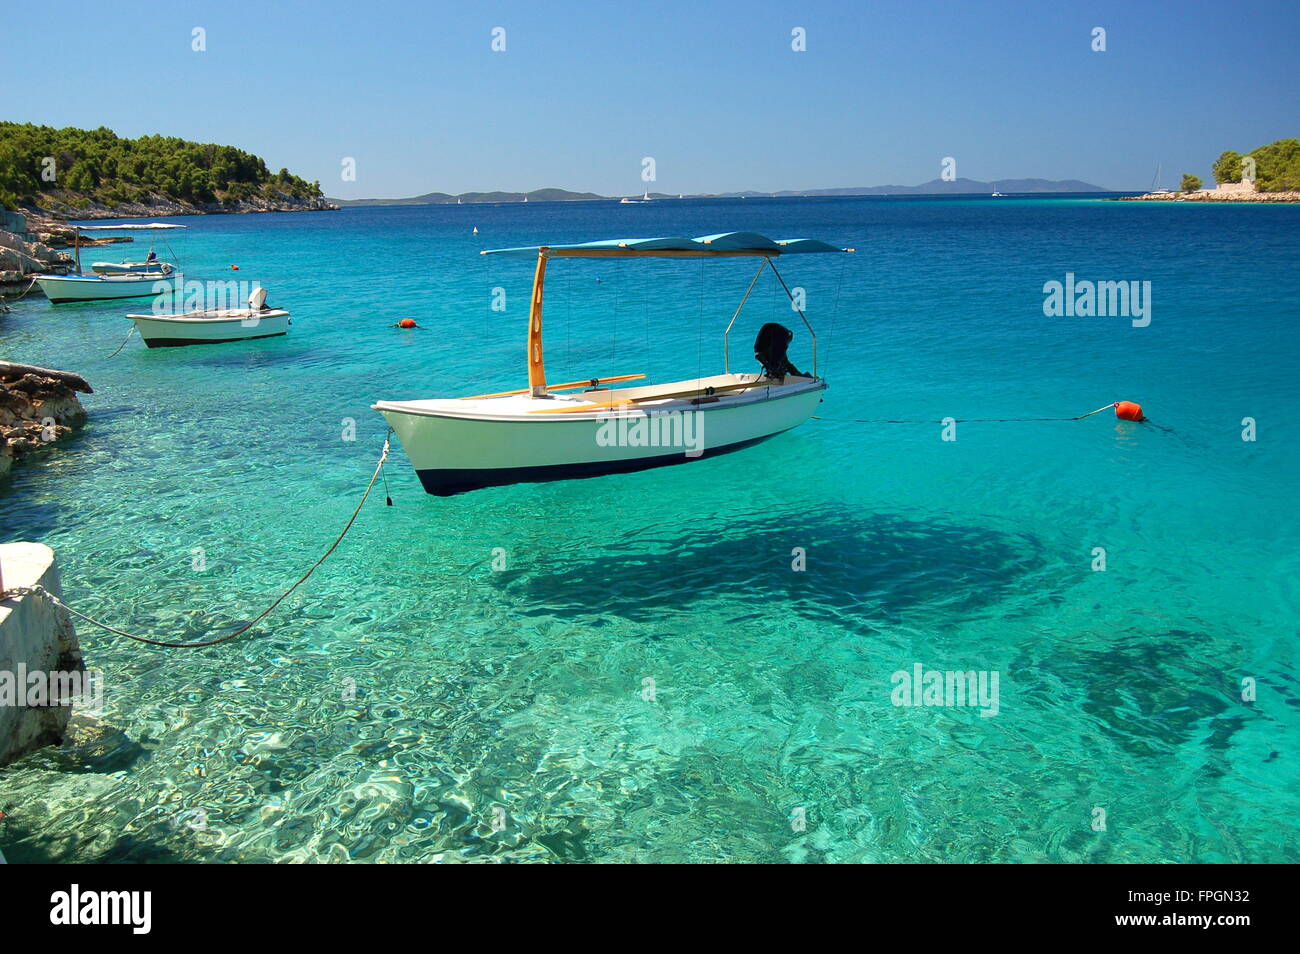 Picturesque scene of boats in a quiet bay of Milna on Brac island, Croatia Stock Photo